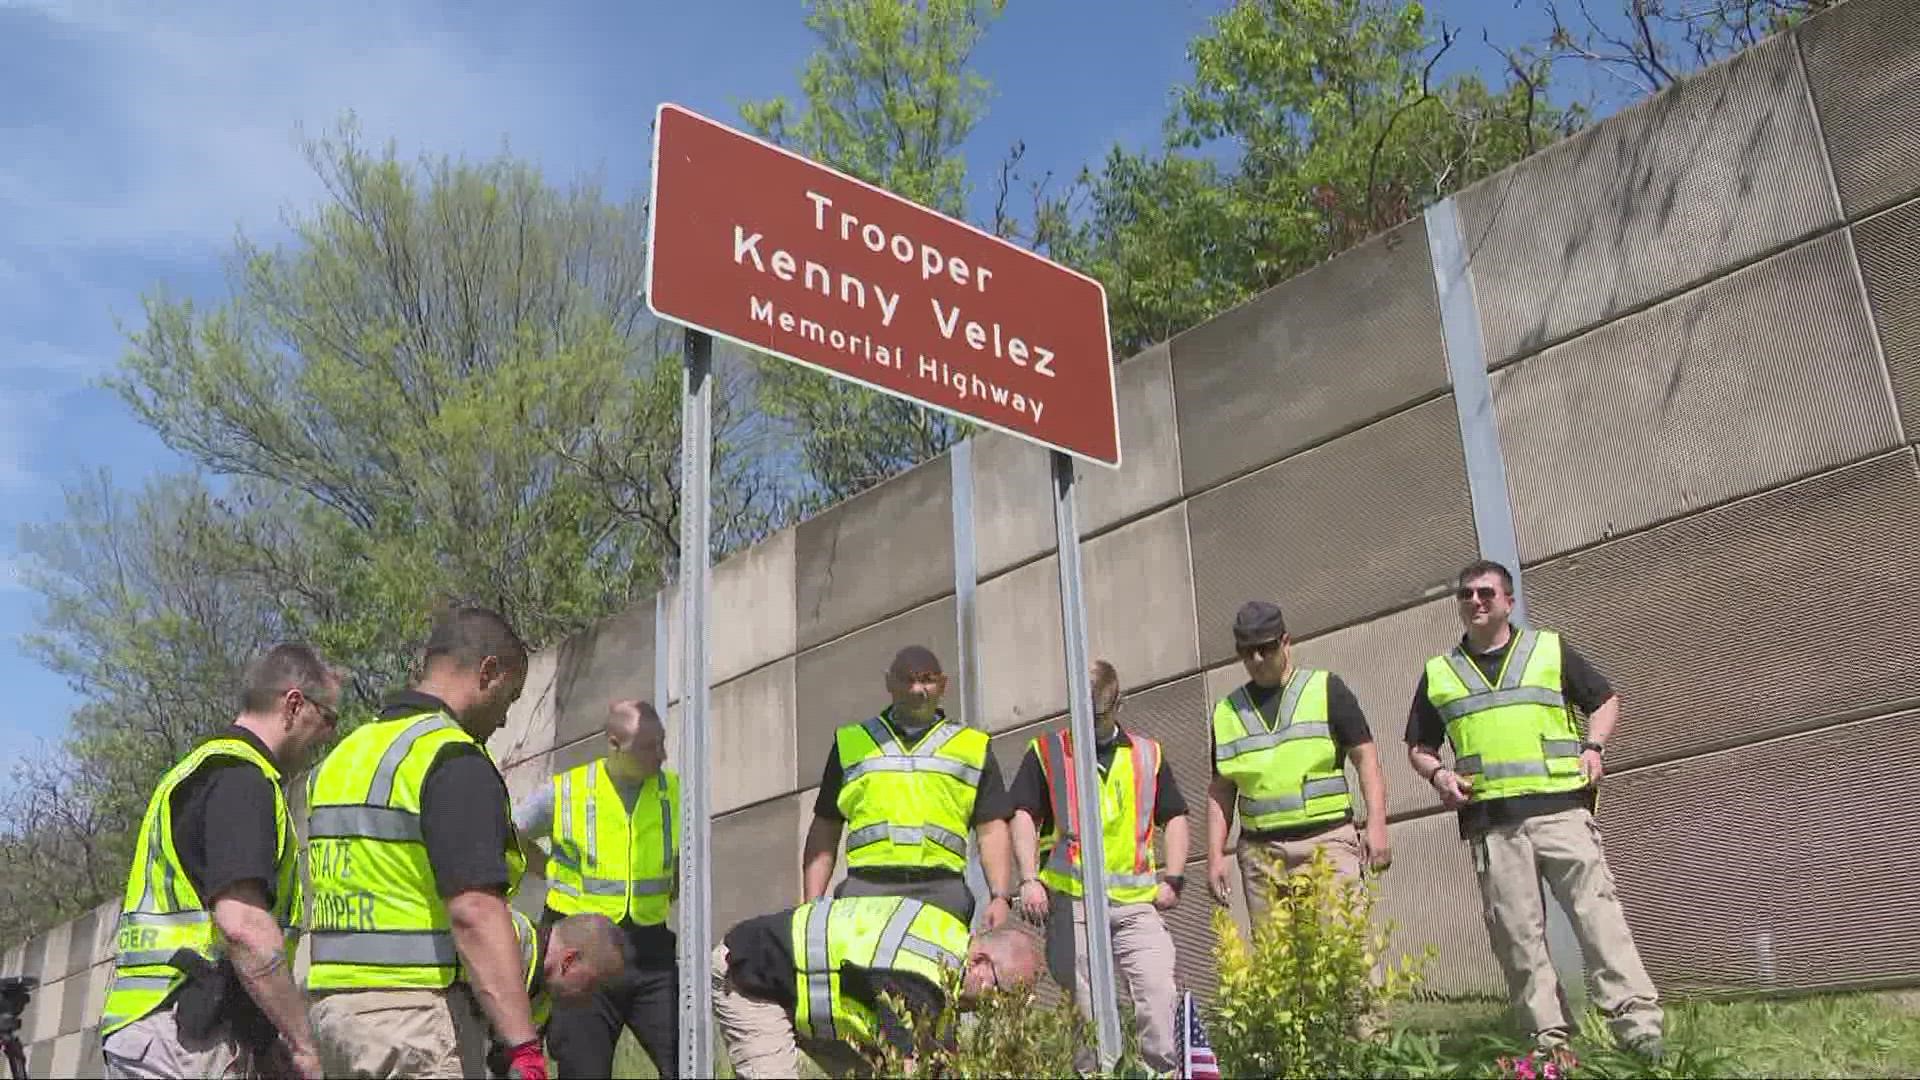 3News’ Jasmine Monroe has the story of how Ohio State Patrol troopers are digging deep and planting memories along I-90 in honor of trooper Kenny Velez.